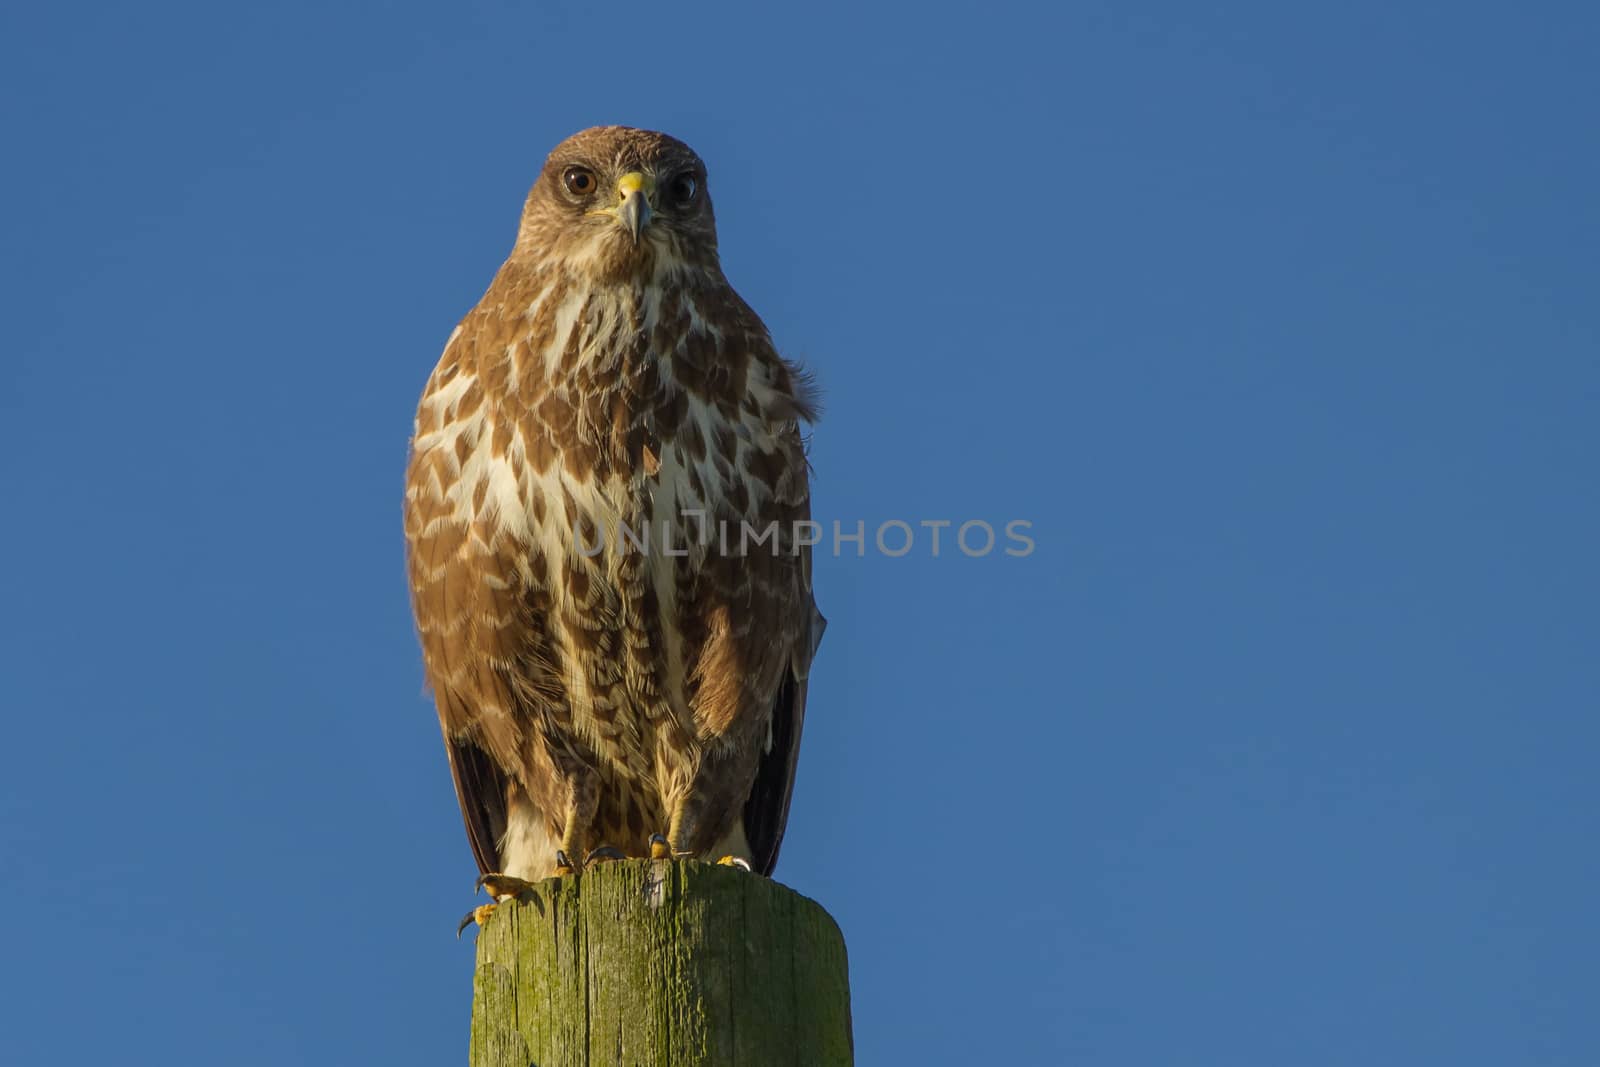 Buzzard (Buteo buteo) perched on wooden post